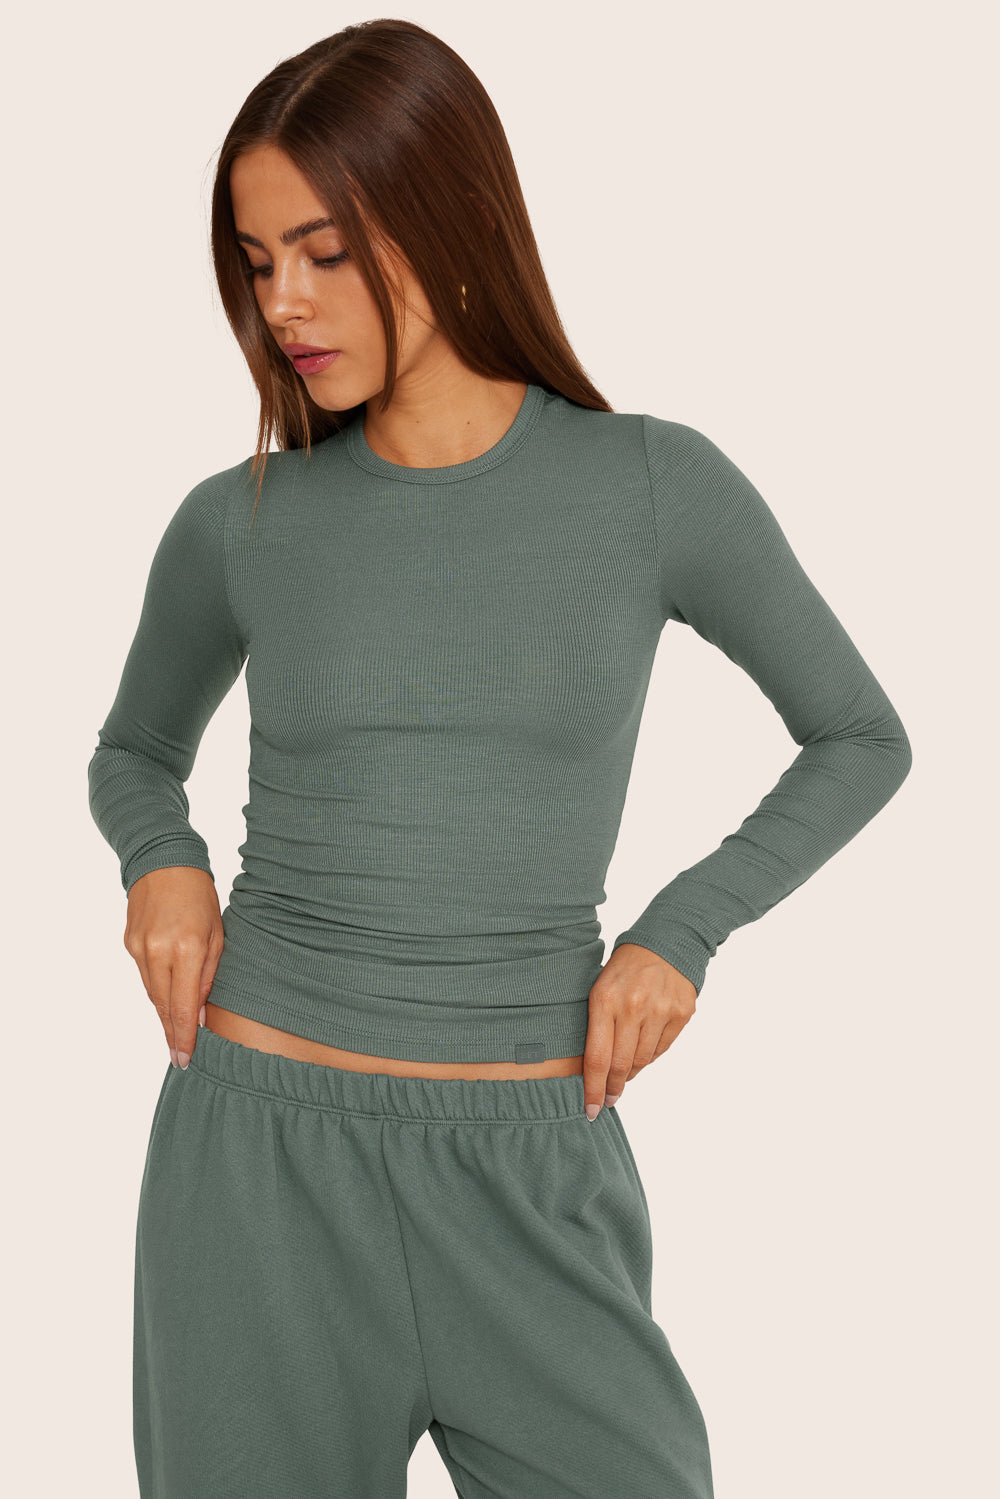 RIBBED MODAL ESSENTIAL LONG SLEEVE - WAVE Featured Image